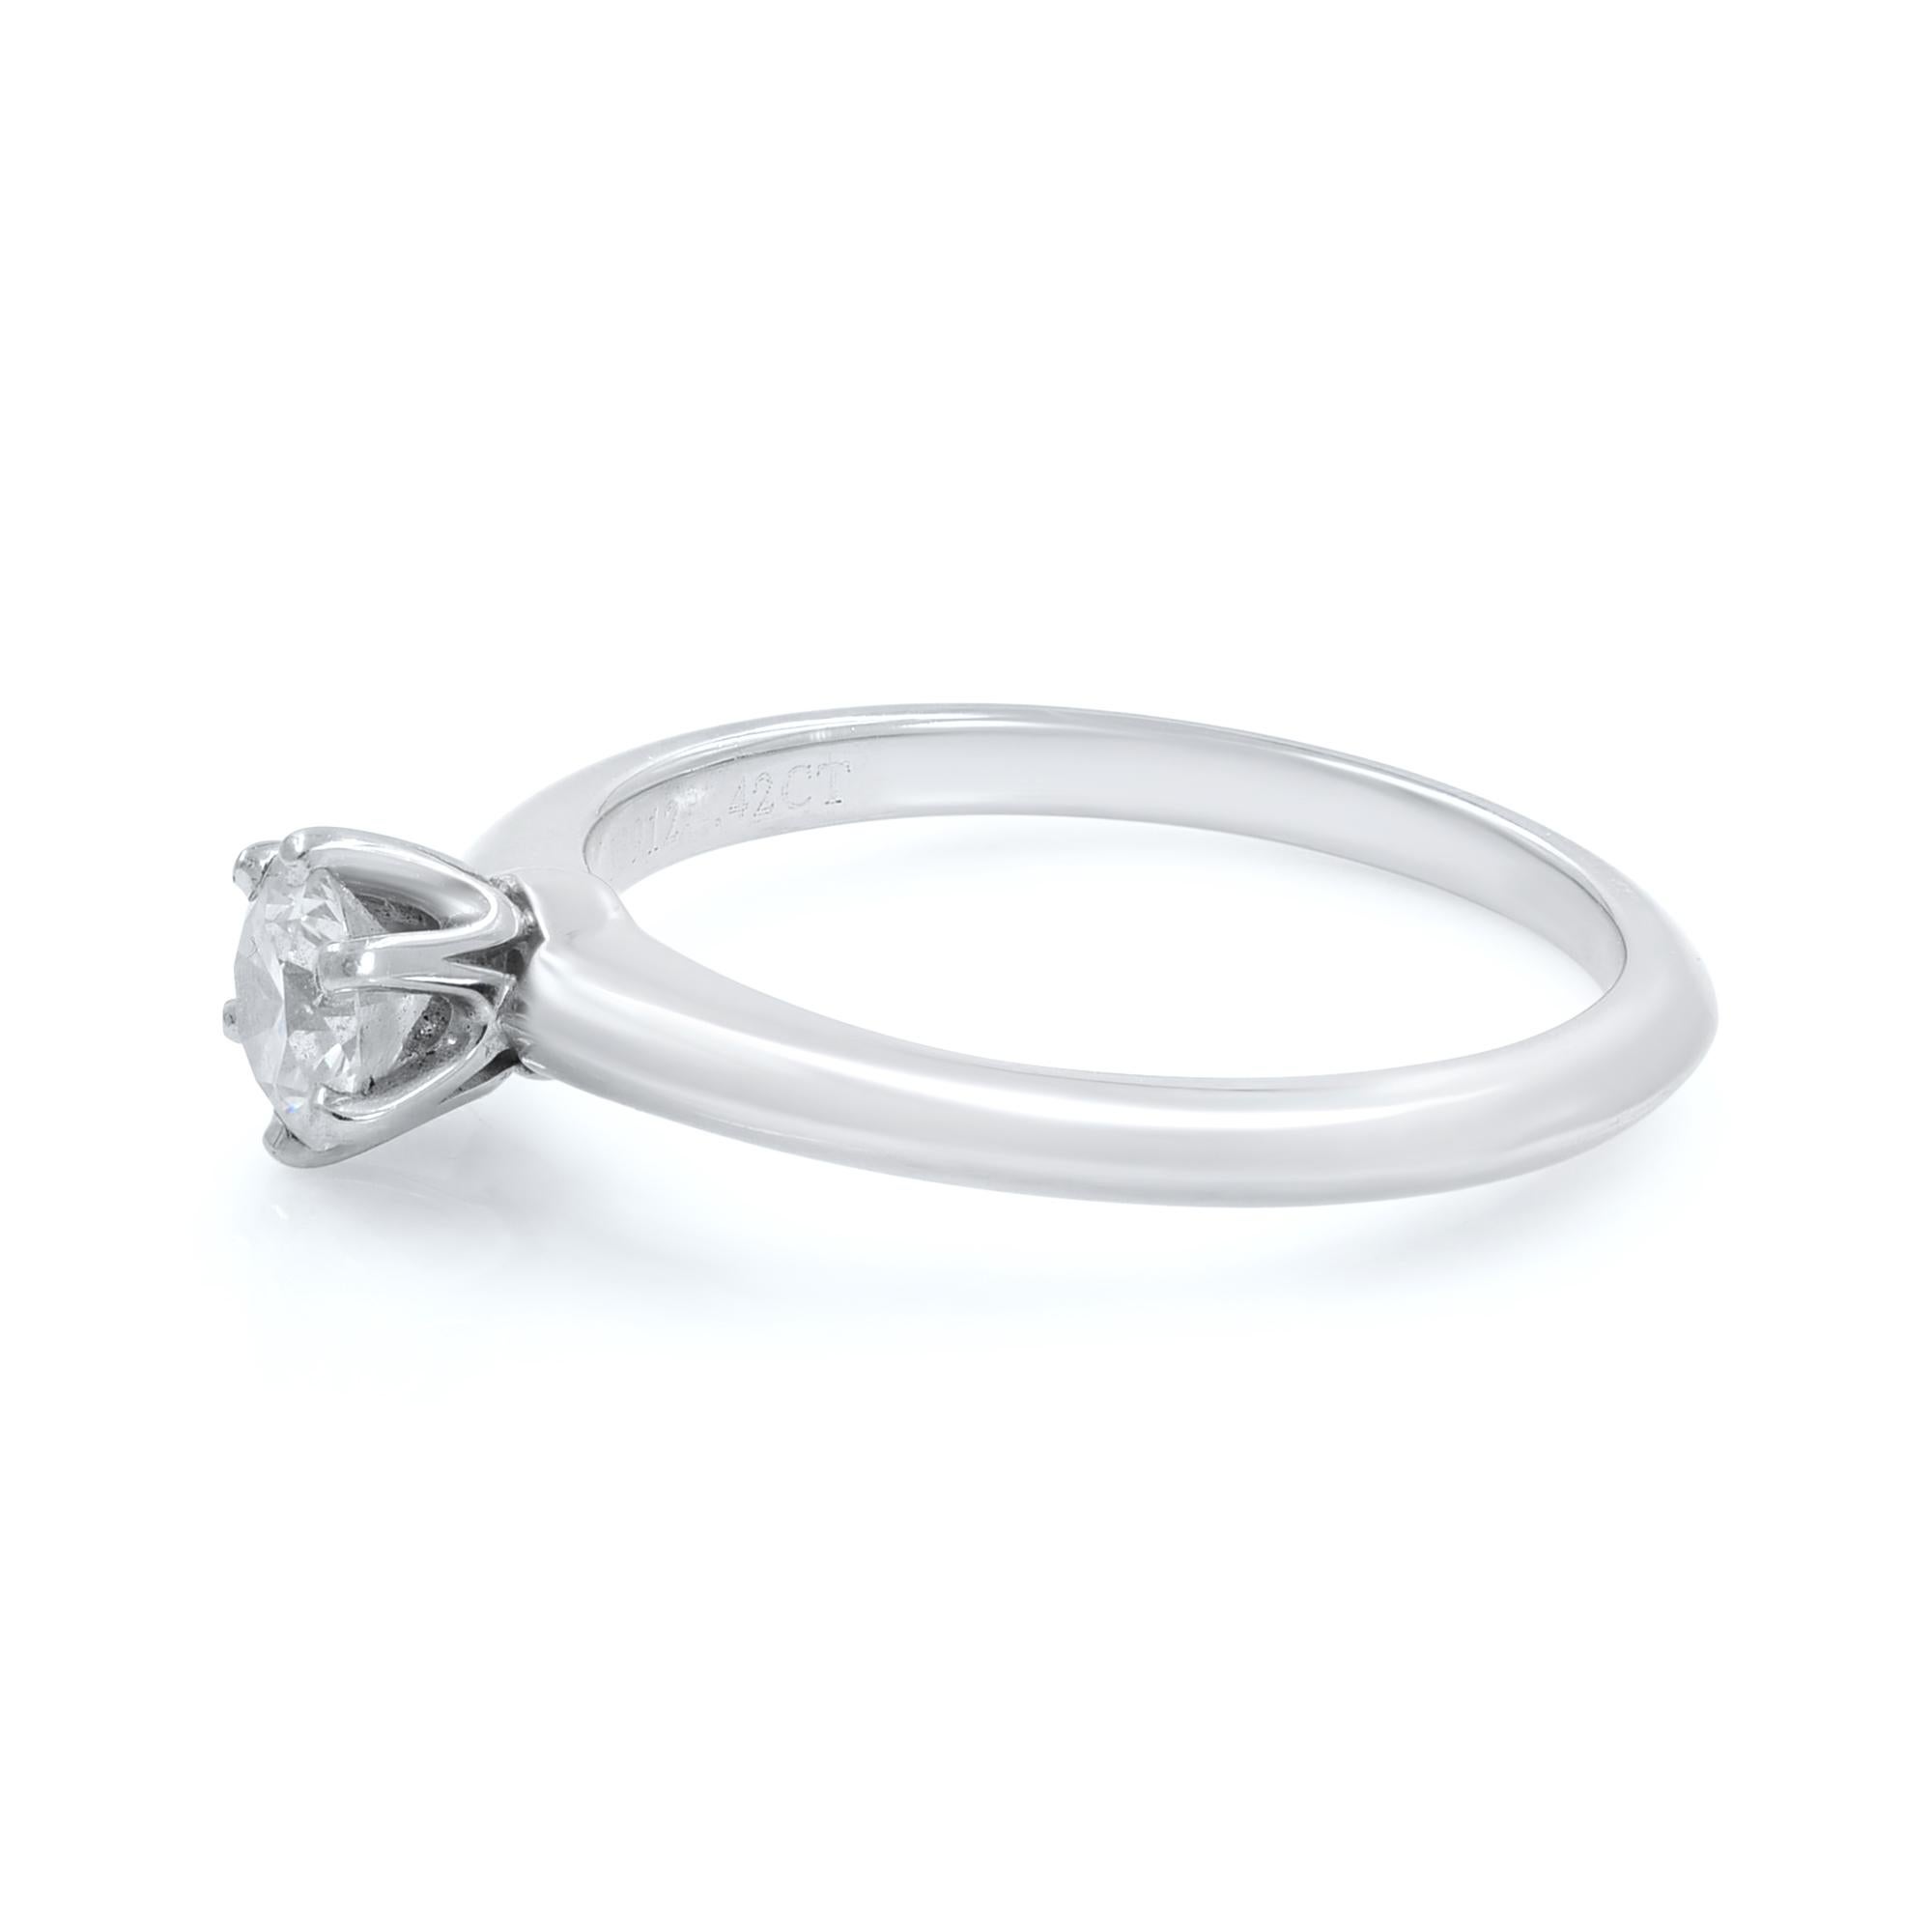 Pre-owned solitaire diamond ring. Excellent condition!
Popular knife edge classic Solitaire diamond engagement ring from Tiffany & Co. 
Round Cut: 0.42ct 
Six Prong Setting. 
Comes with Tiffany pouch. 
Size 6.5